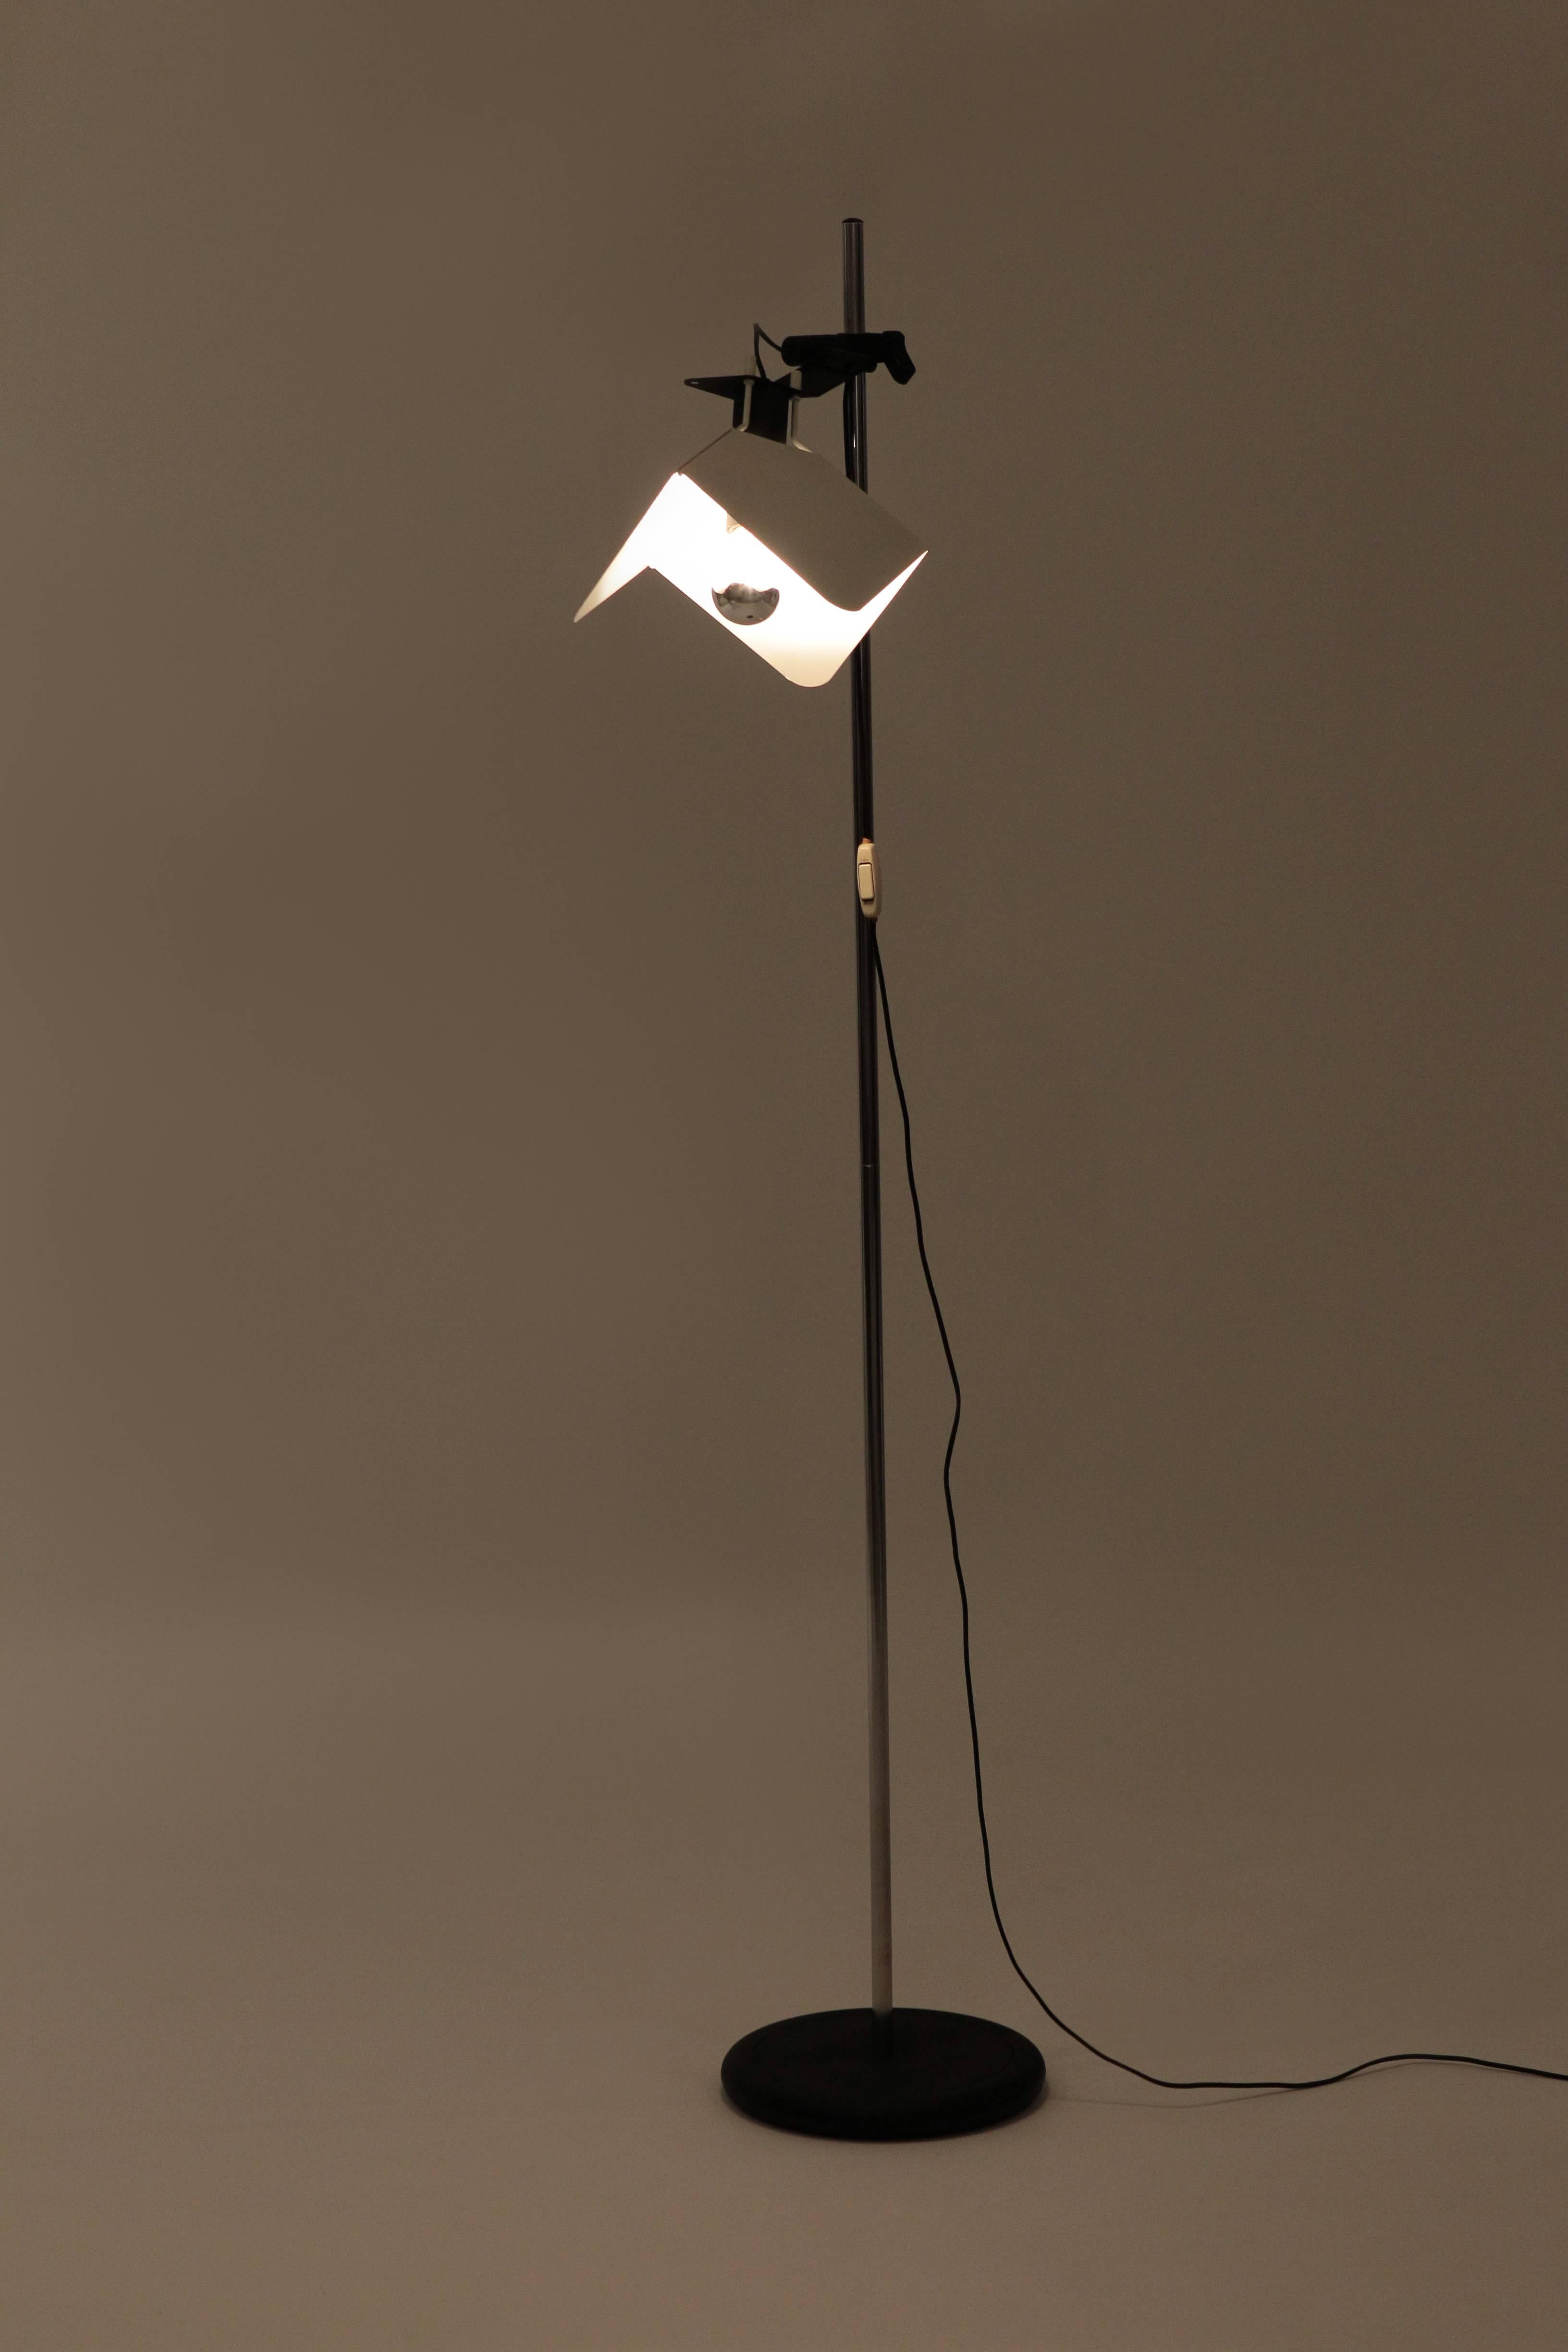 Joe Colombo “Triedro” floor lamp manufactured by Stilnovo in the 1970s in Italy. Adjustable, white lacquered metal shade attached with a joint to a chrome steel pole.